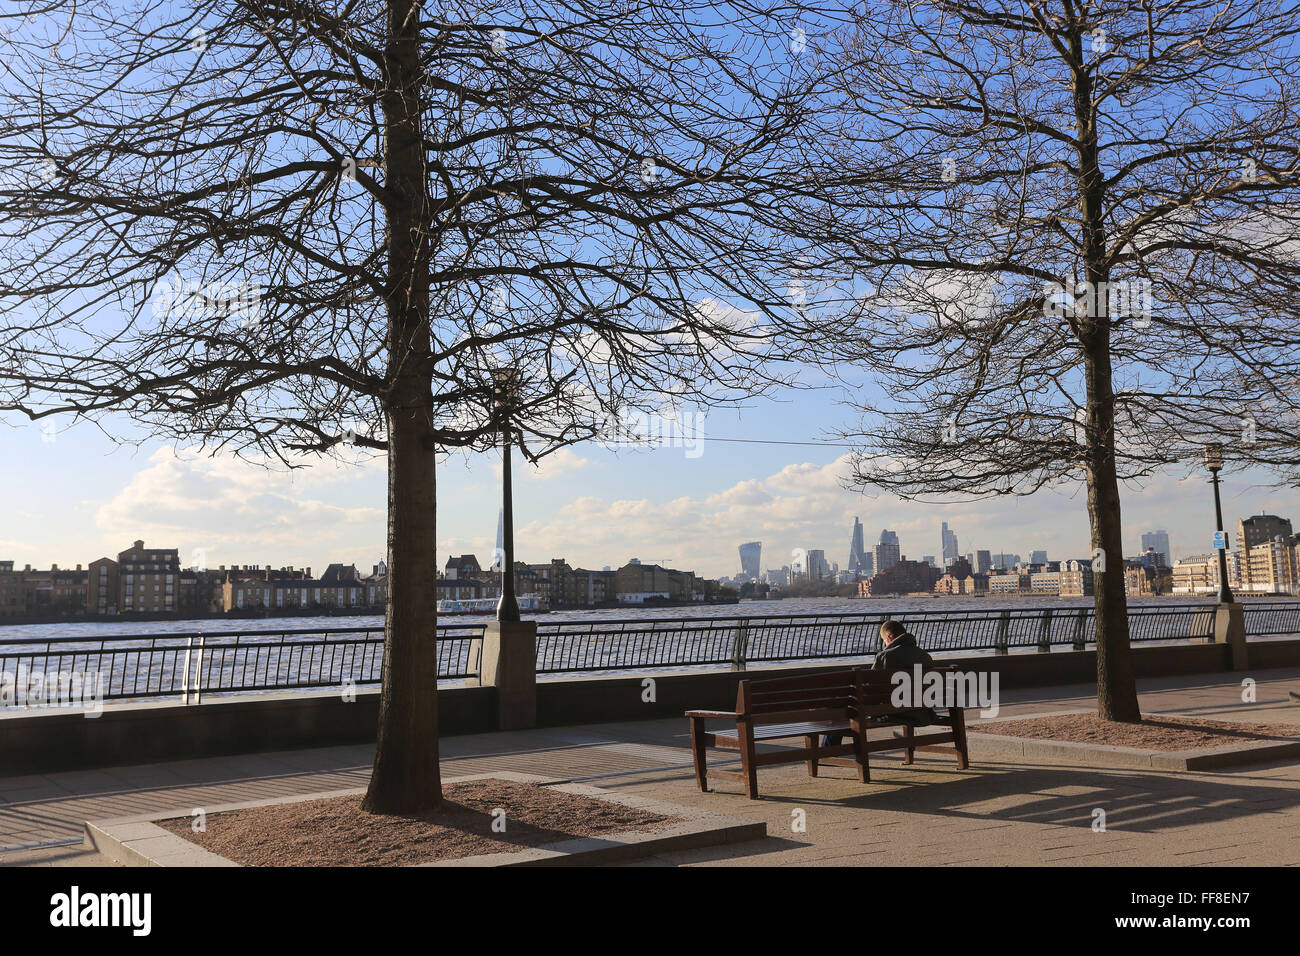 Sitting by The River Thames in the winter sun under the blue sky looking towards The City and Rotherhithe on the Thames Path Stock Photo